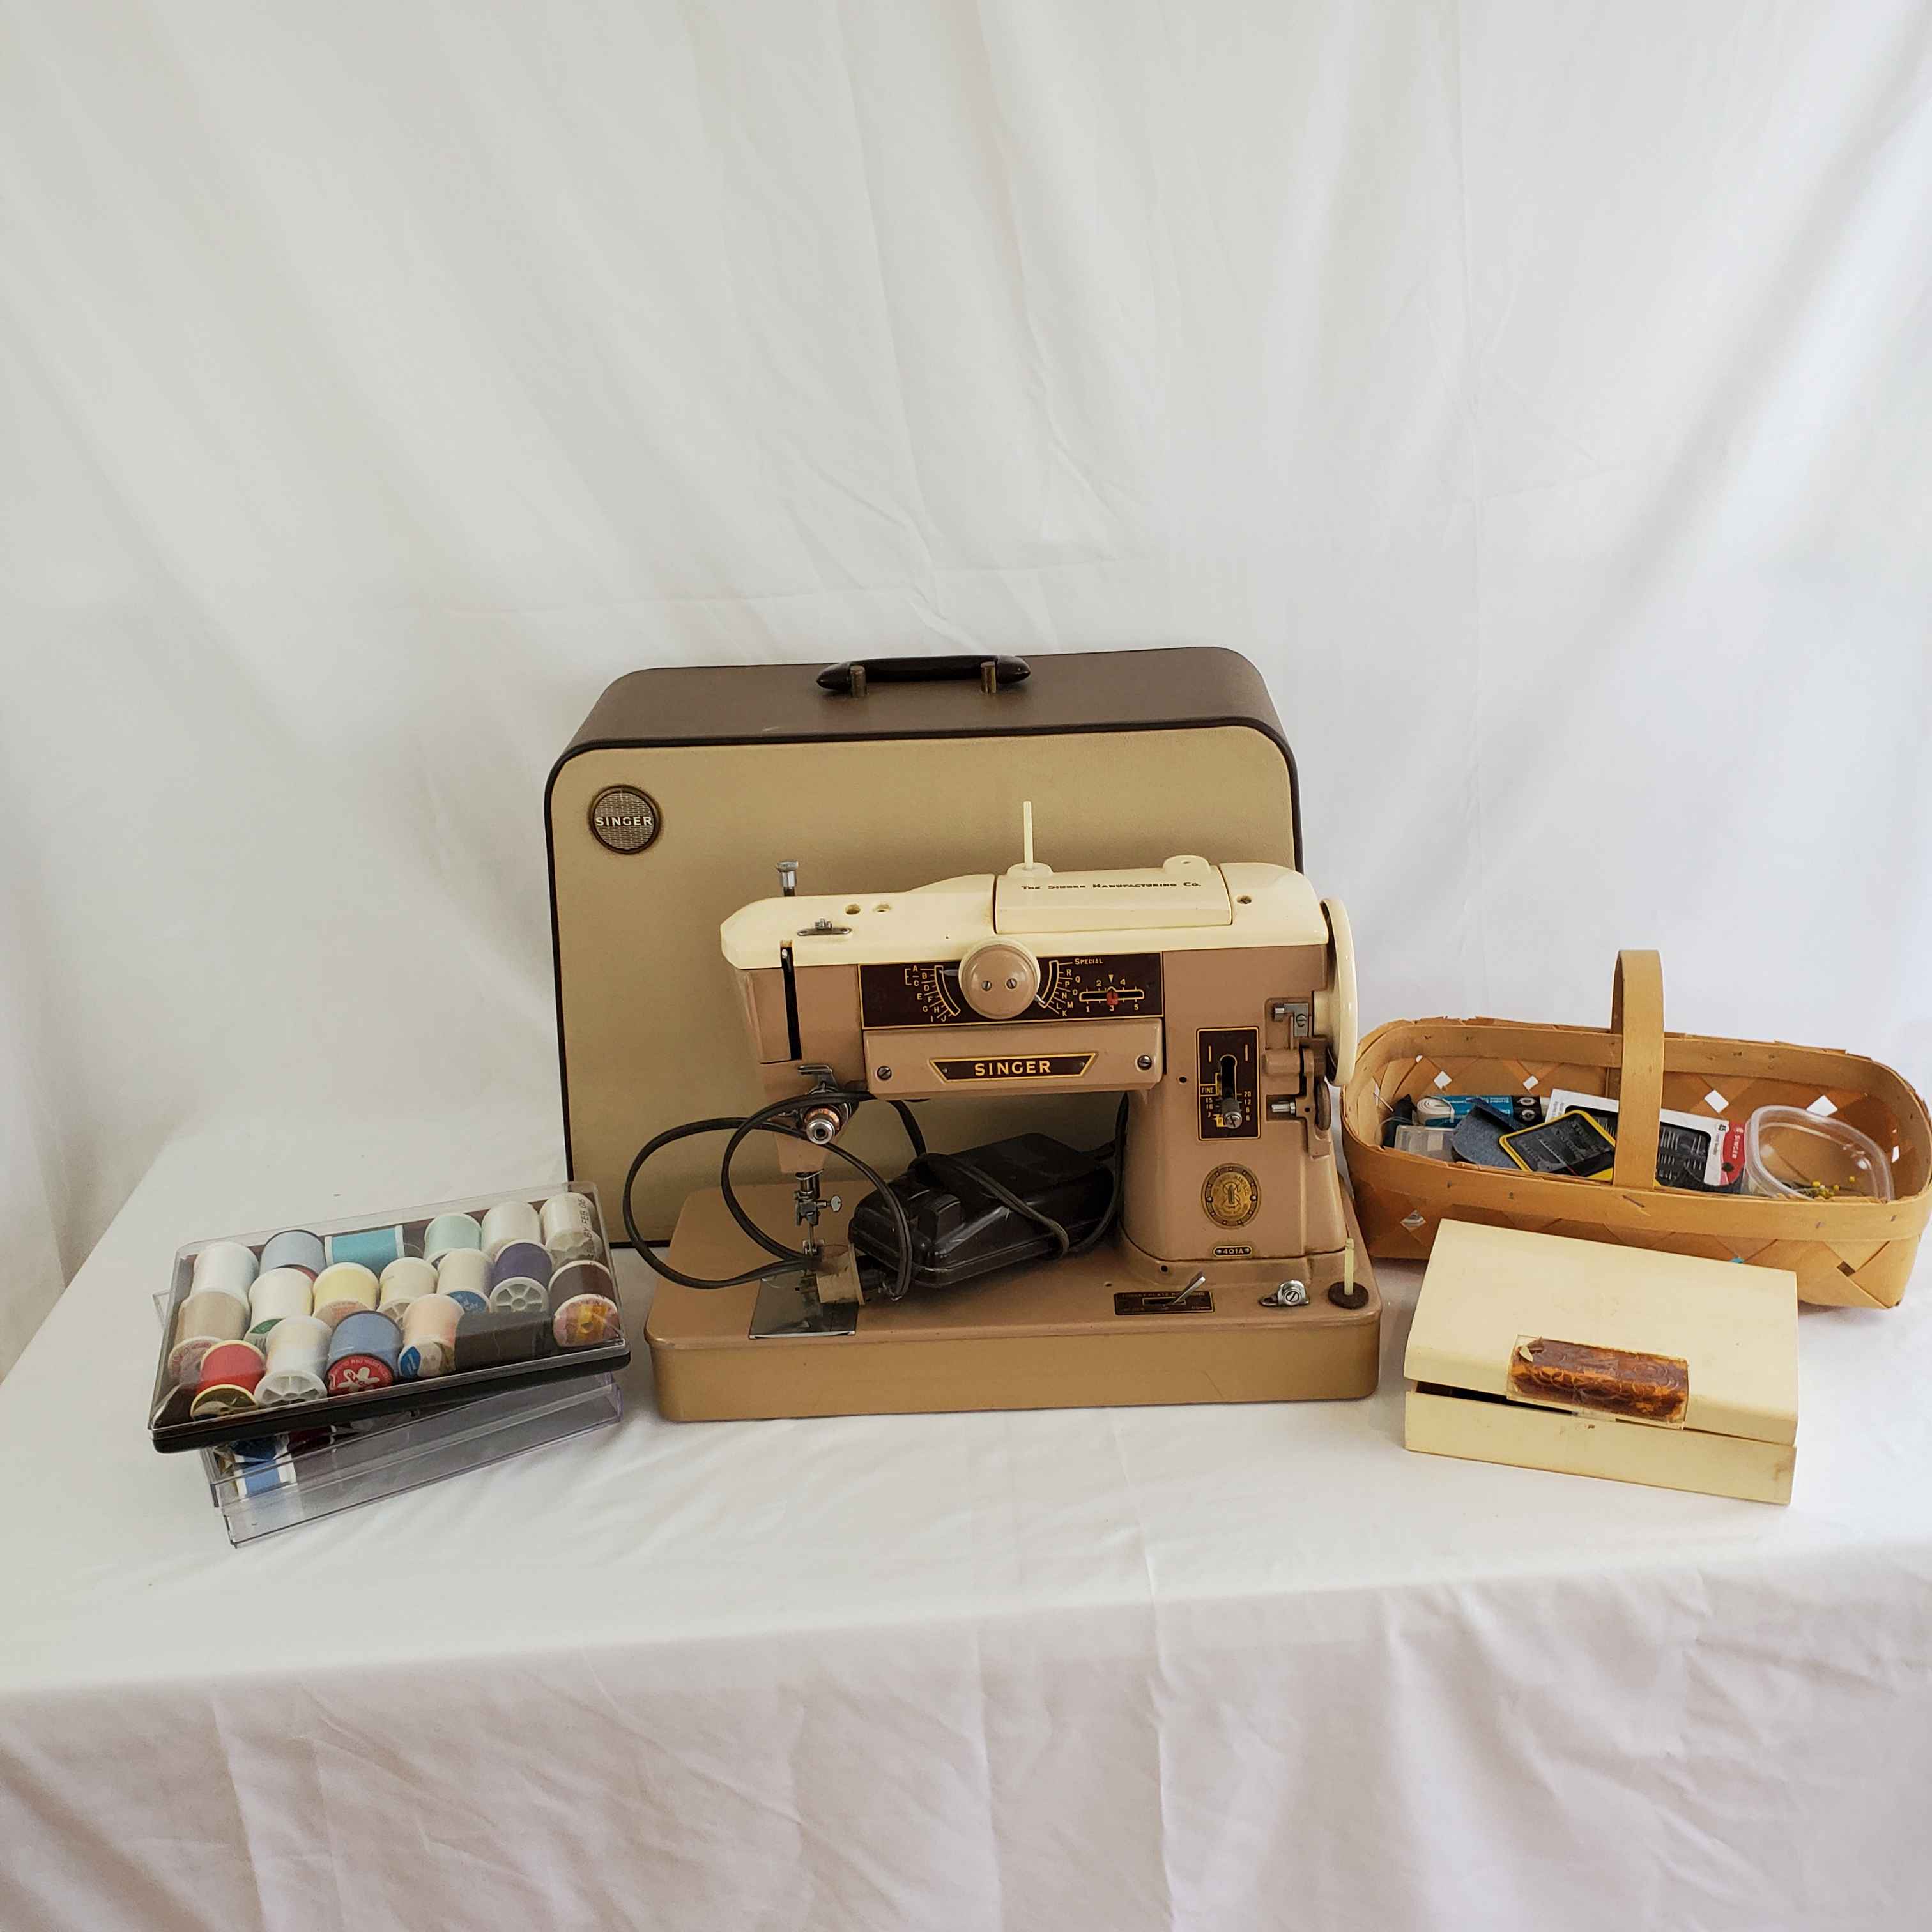 Sold at Auction: Rare vintage Singer Sewing Machine retractable